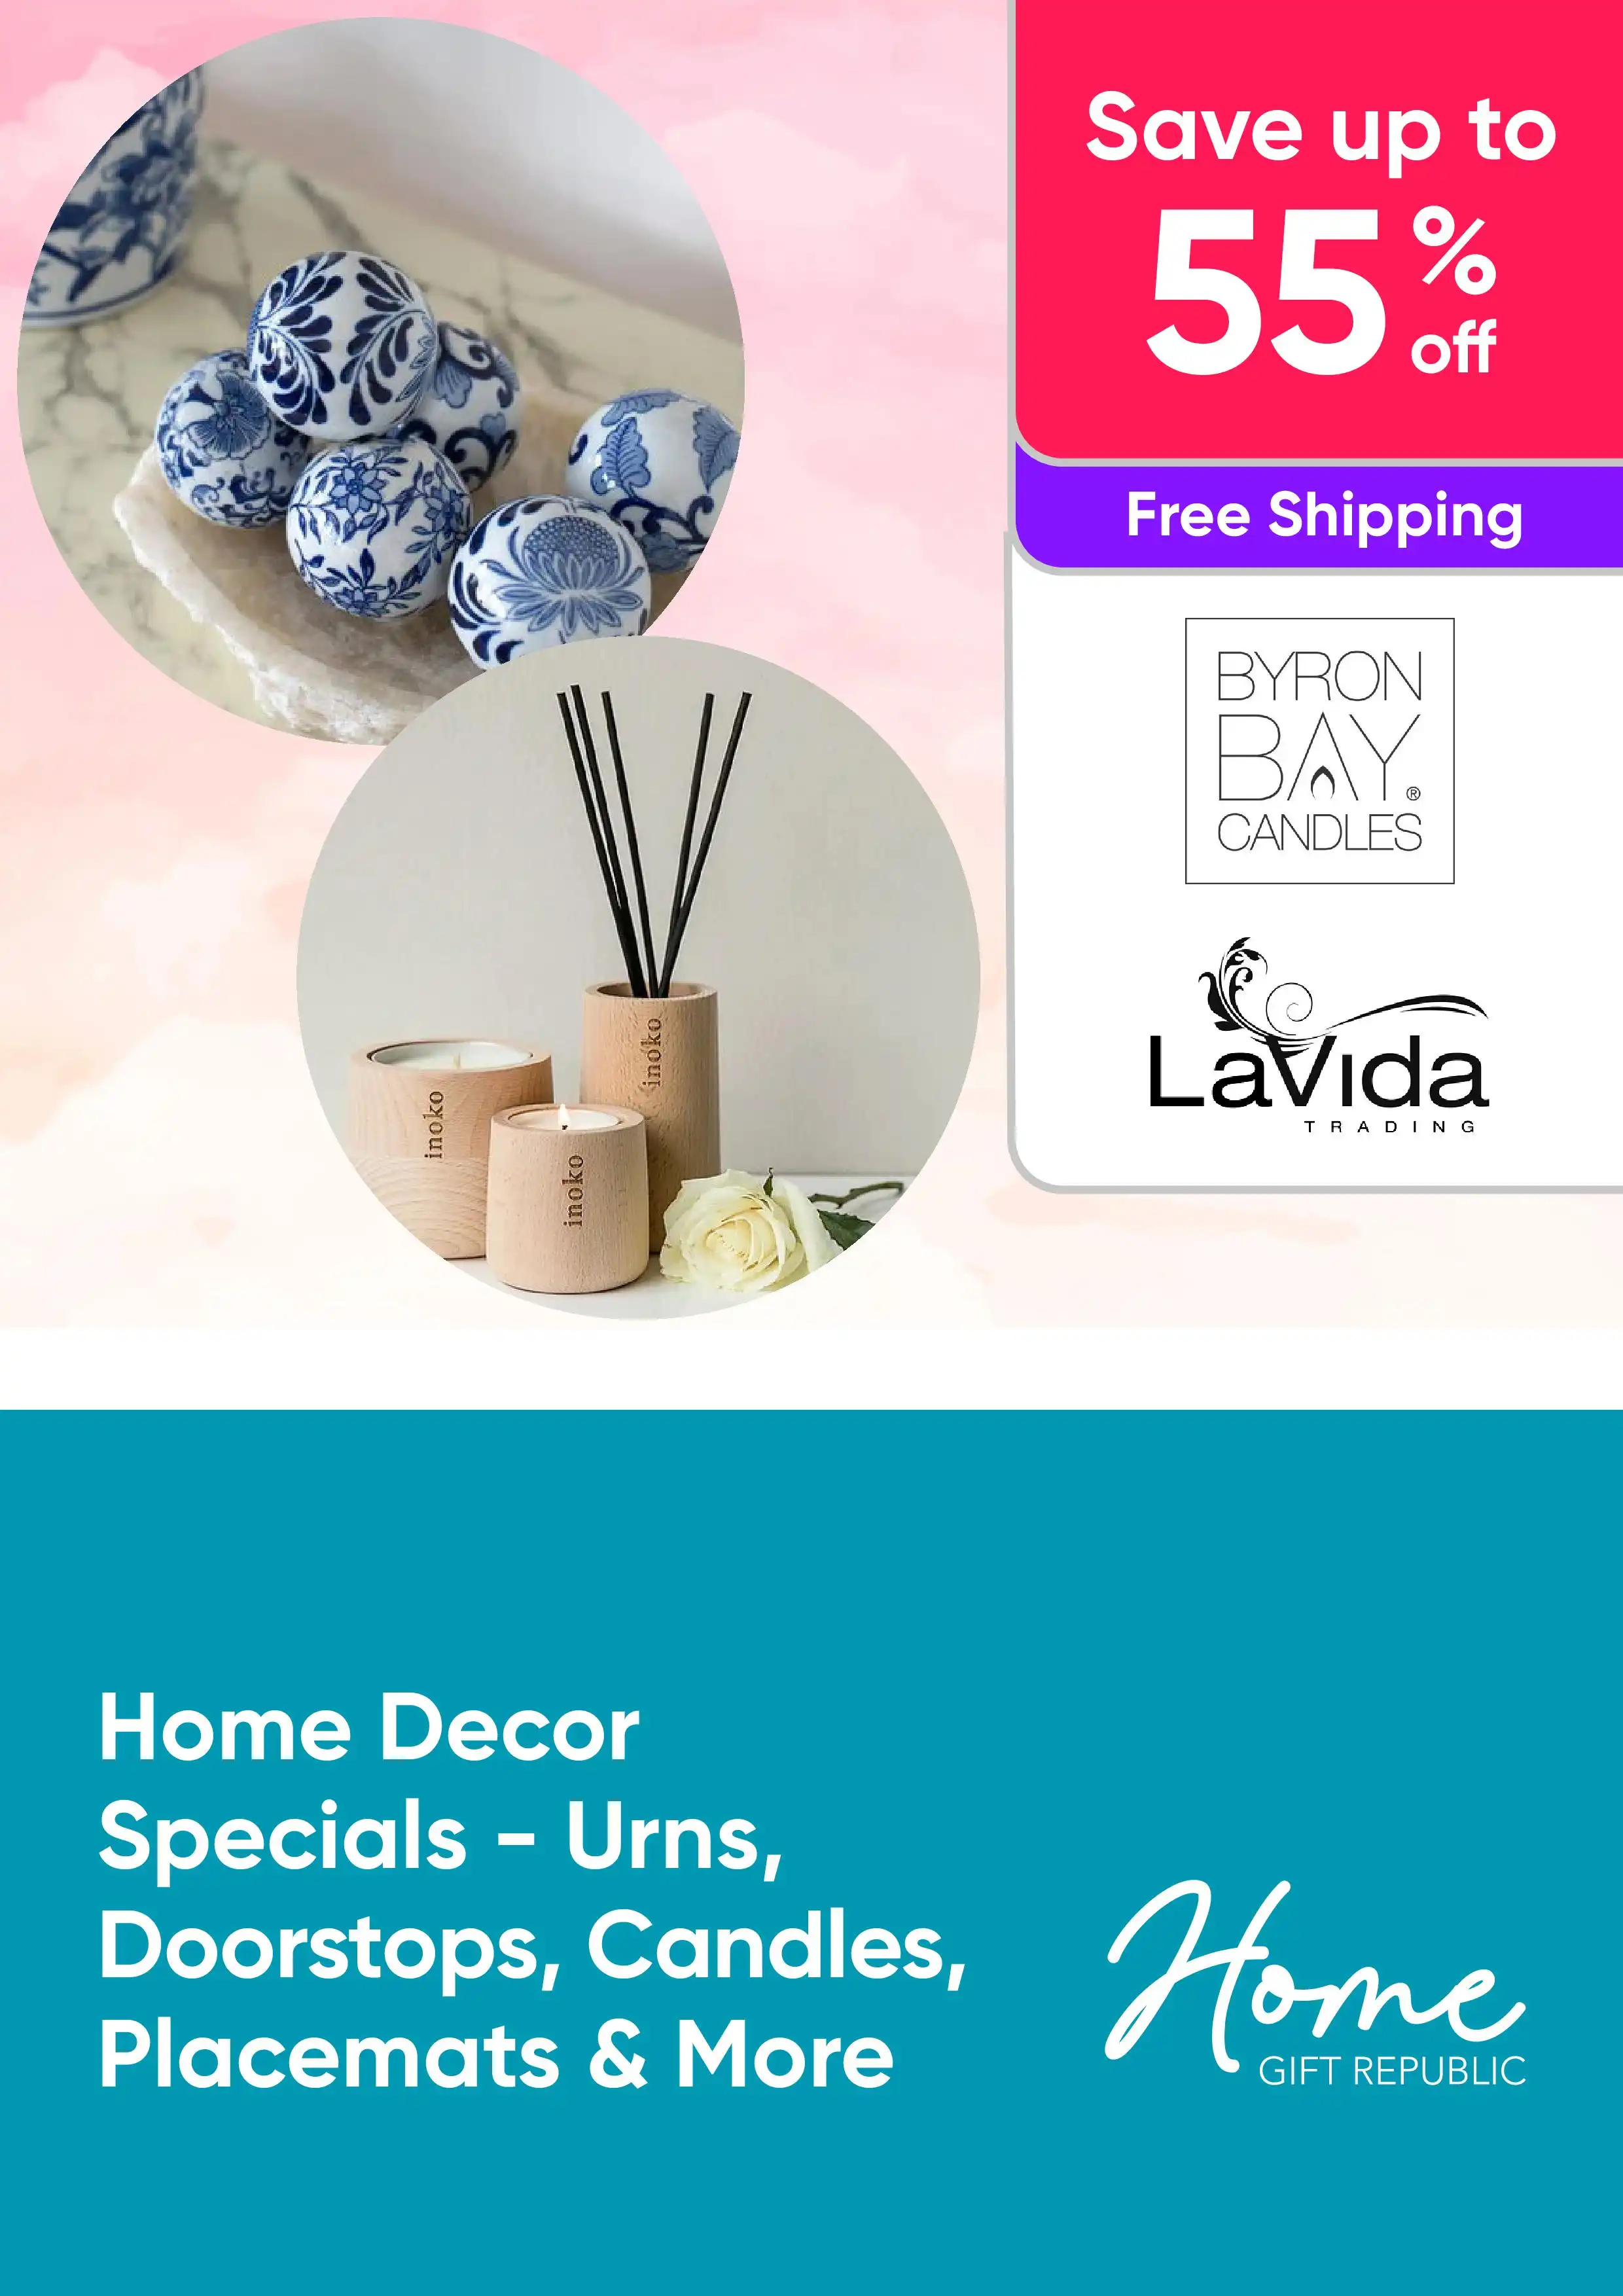 Up to 55% Off Home Decor Specials - Shop Urns, Doorstops, Candles, Placemats